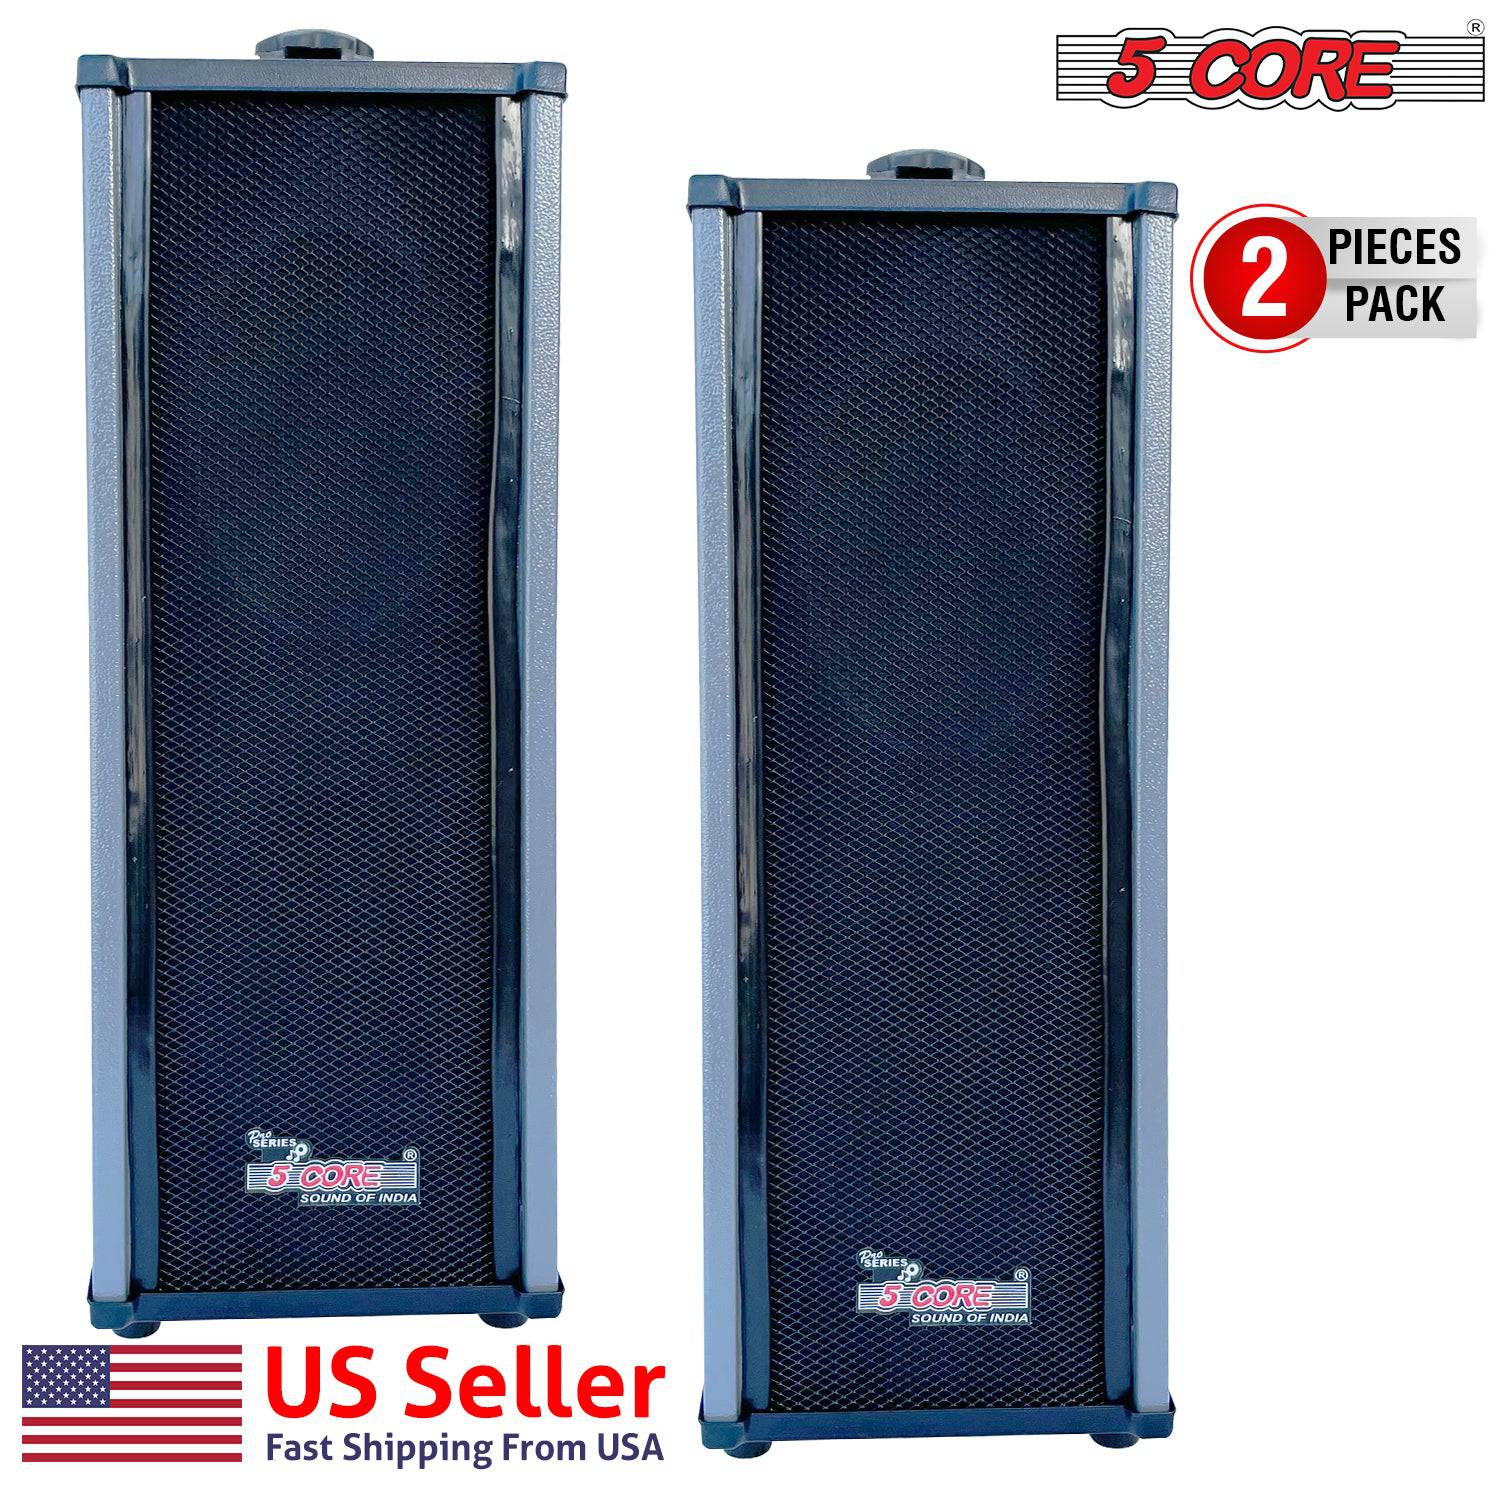 5Core Speaker Commercial Paging PA On Wall Mount Indoor Outdoor Home